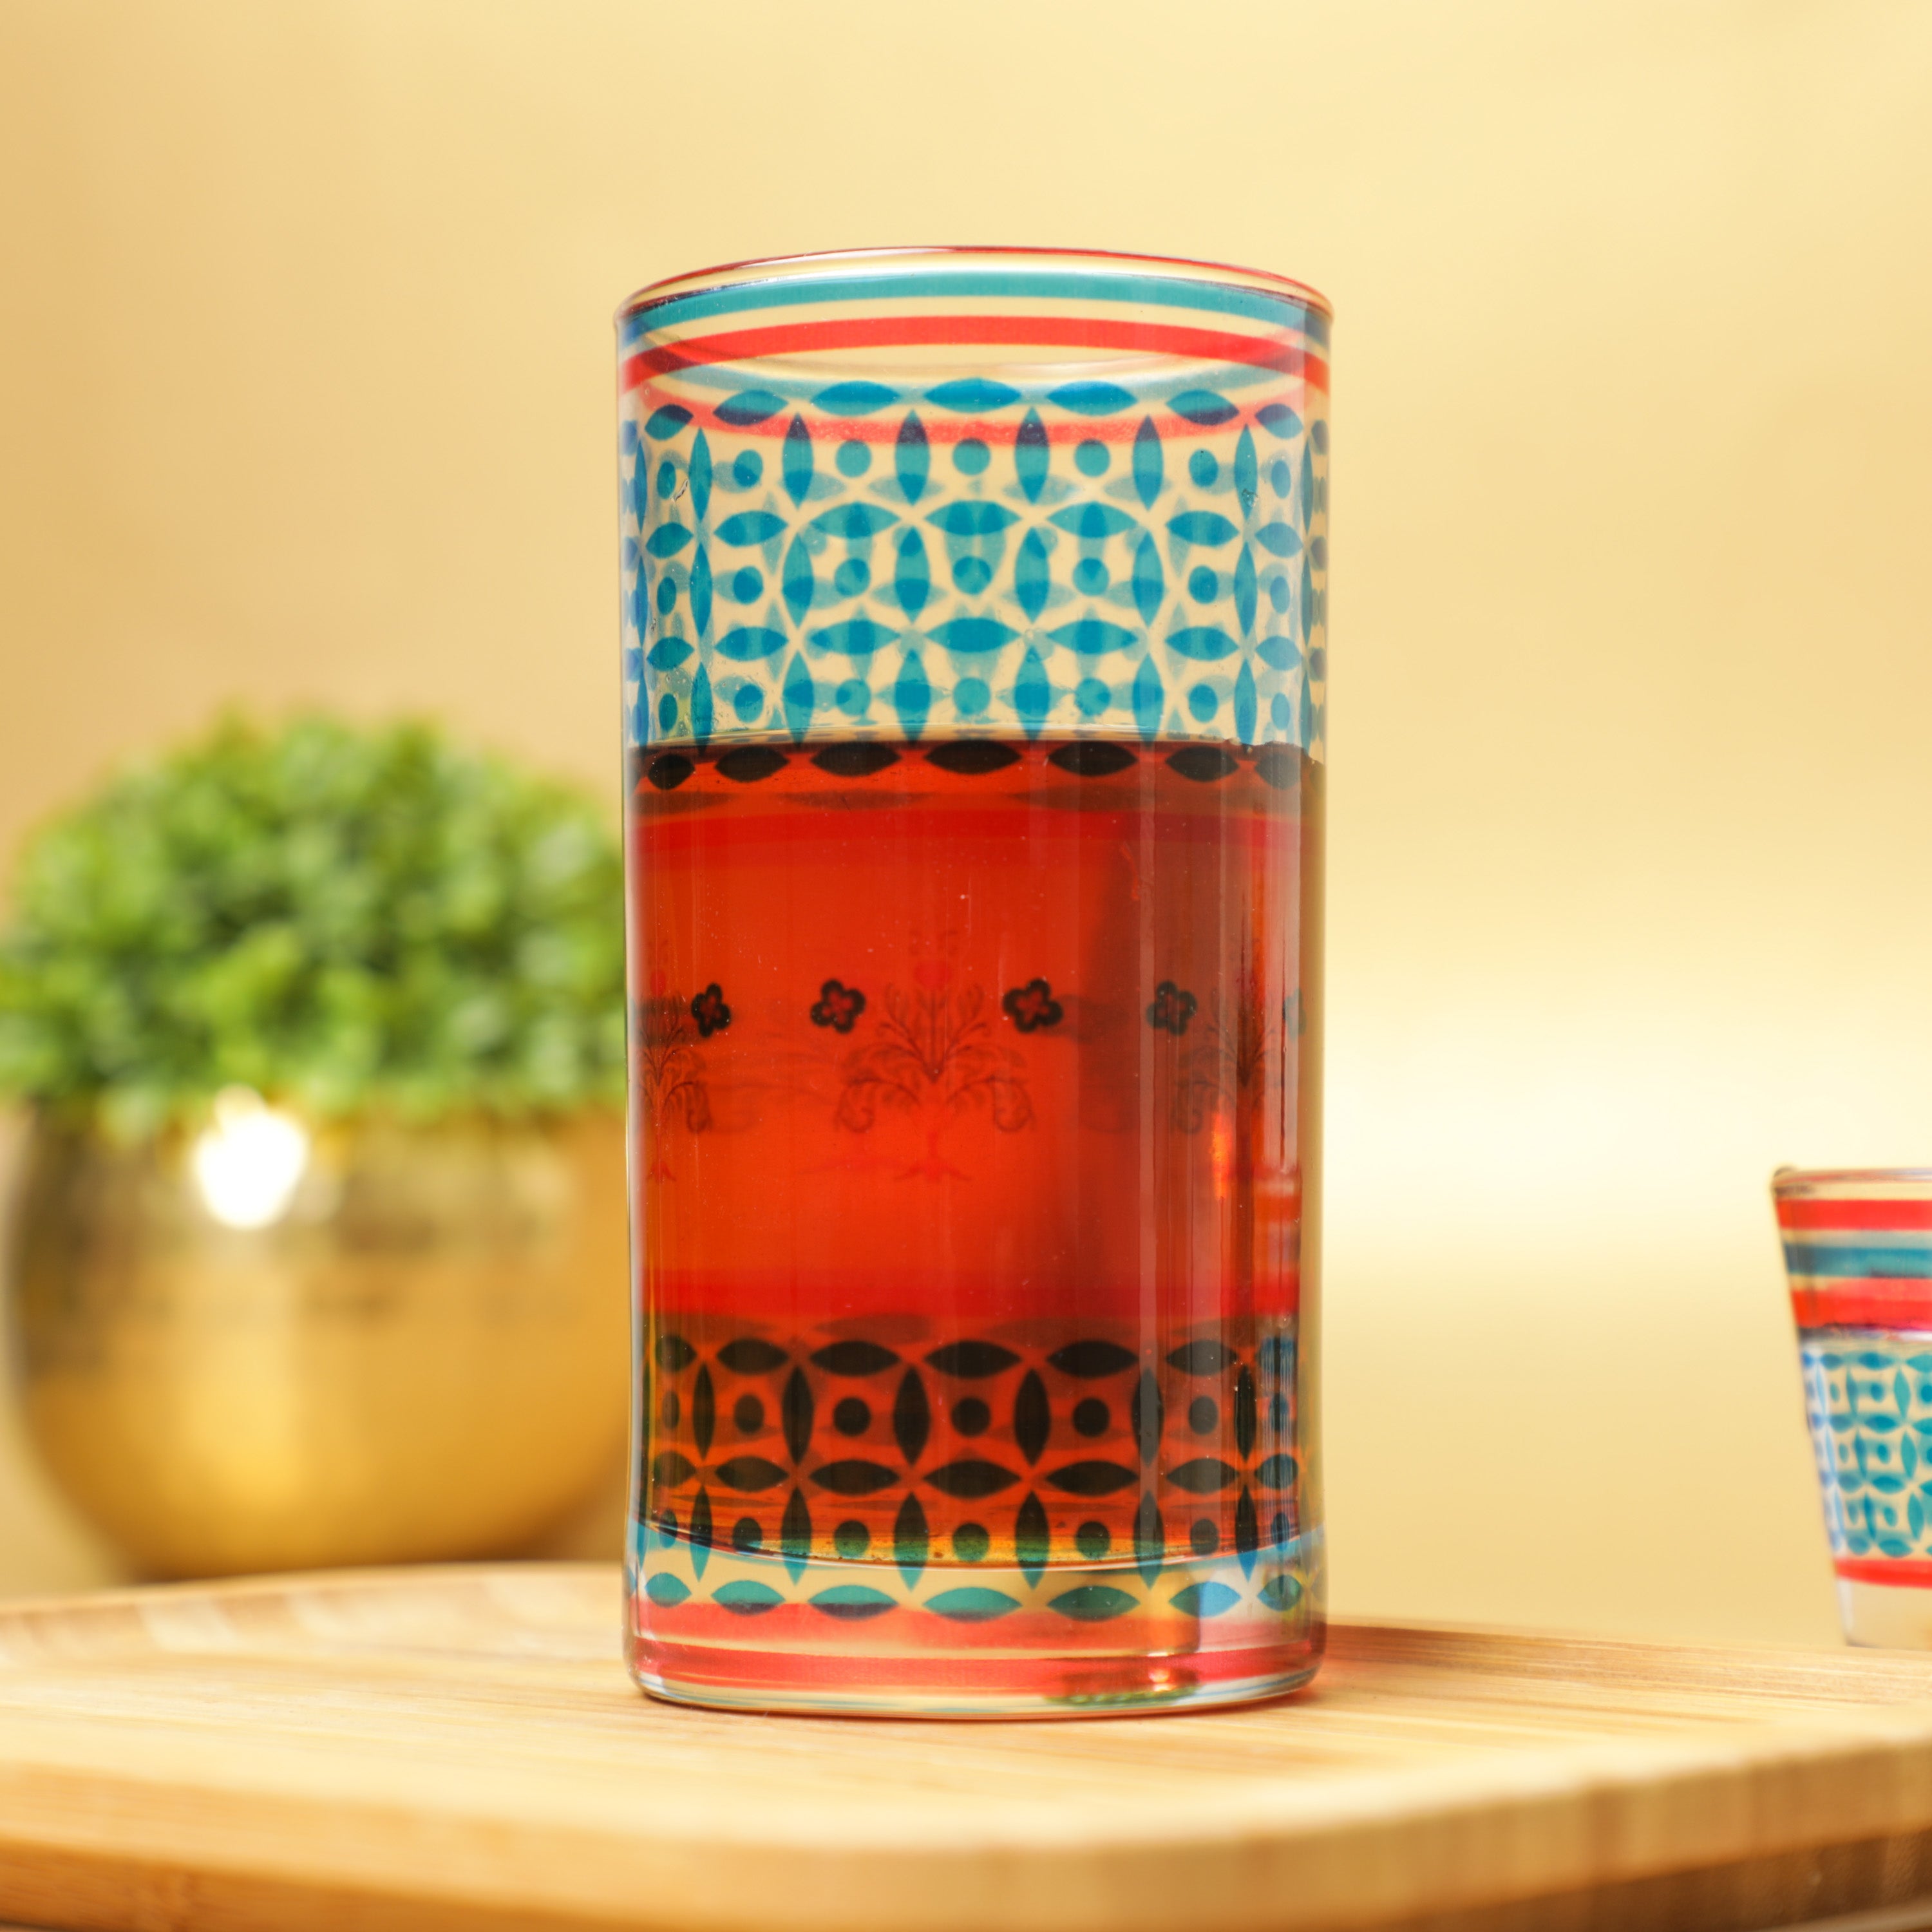 Shop Desi Drinking Glasses & Tumblers in USA from Desifavors